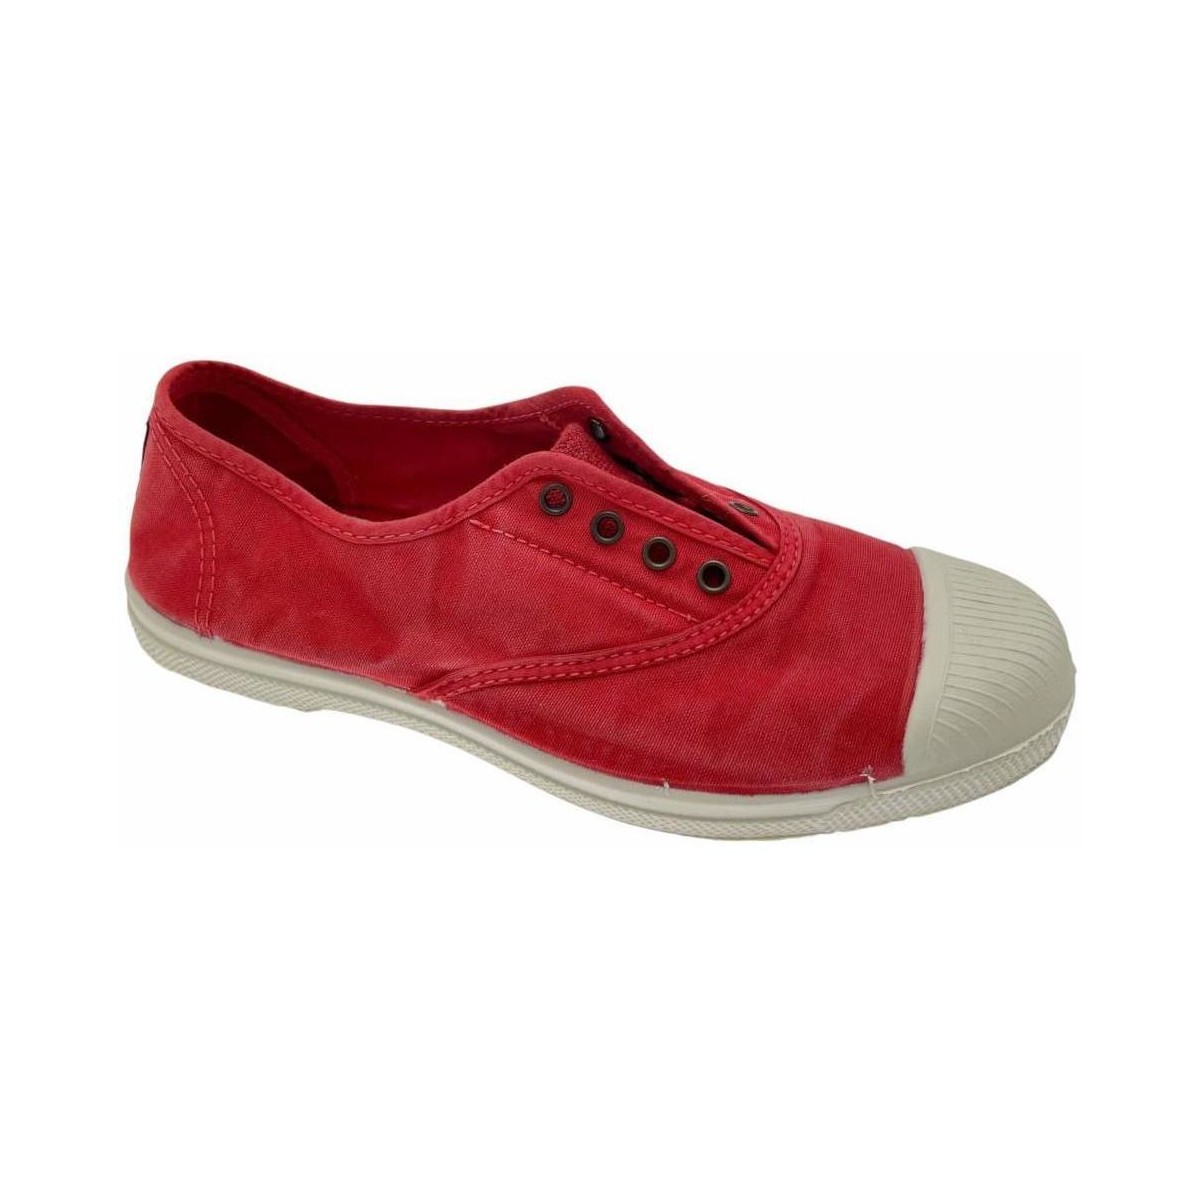 Chaussures Femme Escarpins Natural World NAW1065ros Rouge